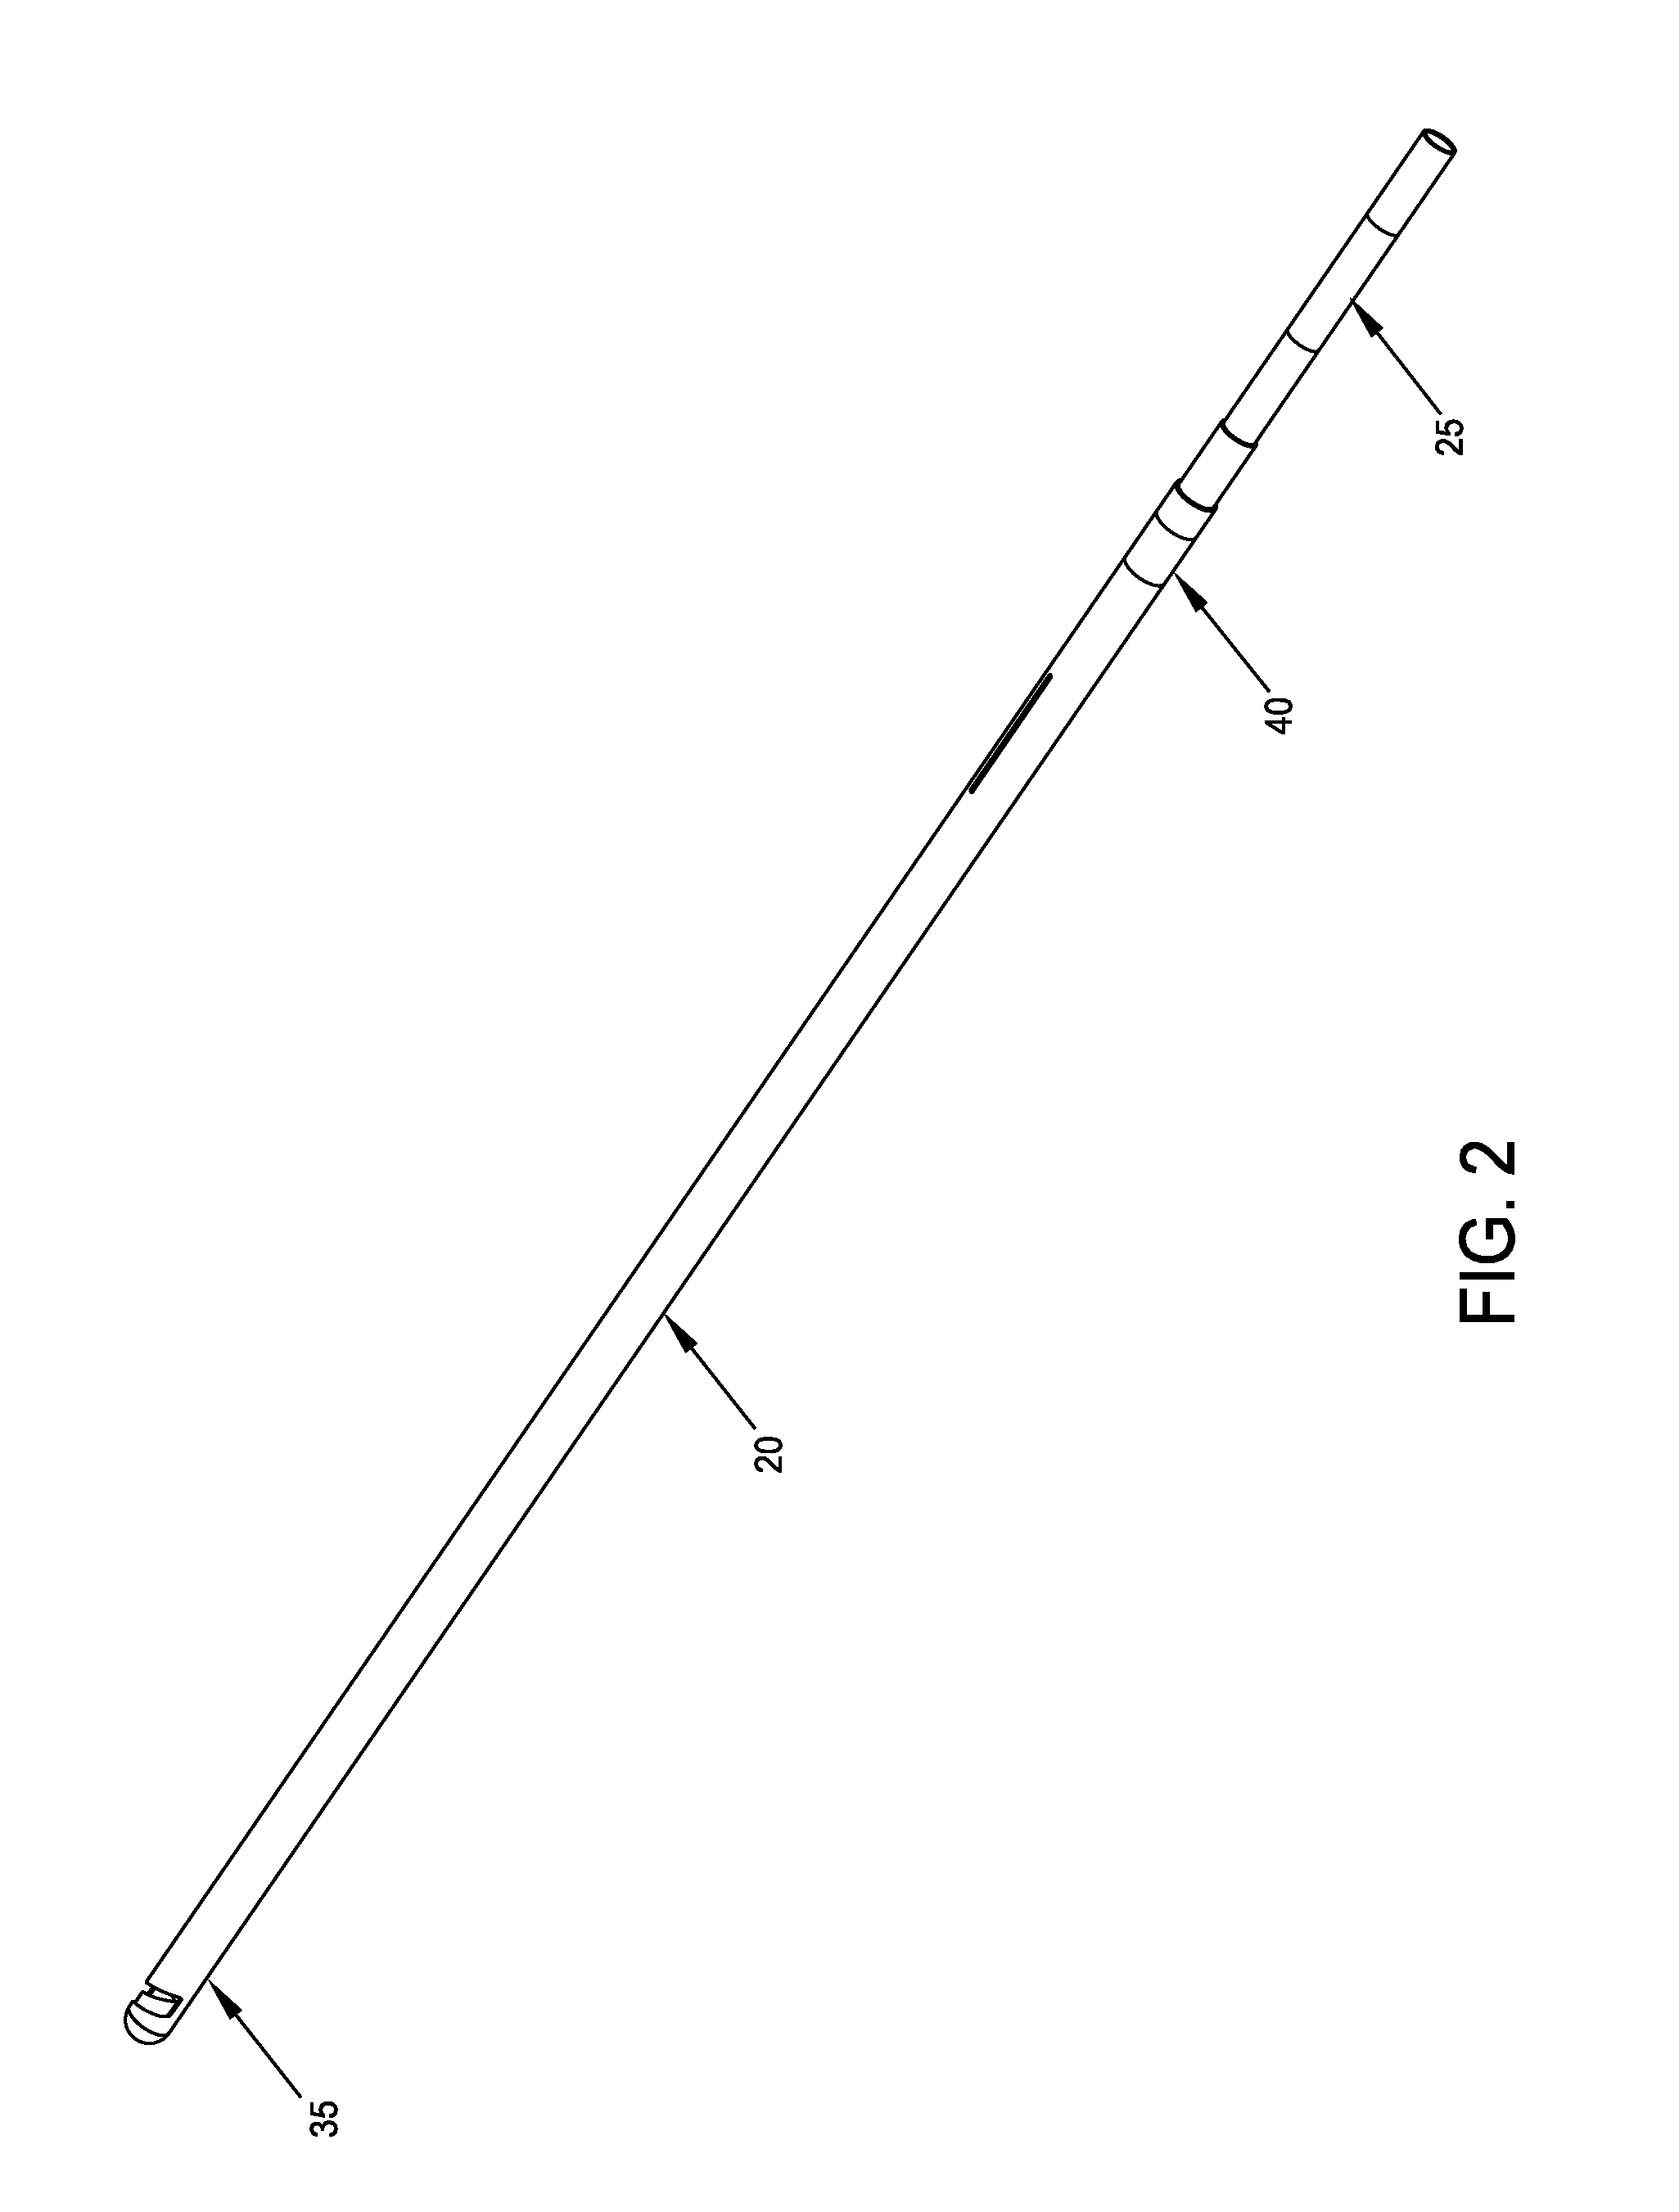 Apparatus and method for cutting tissue